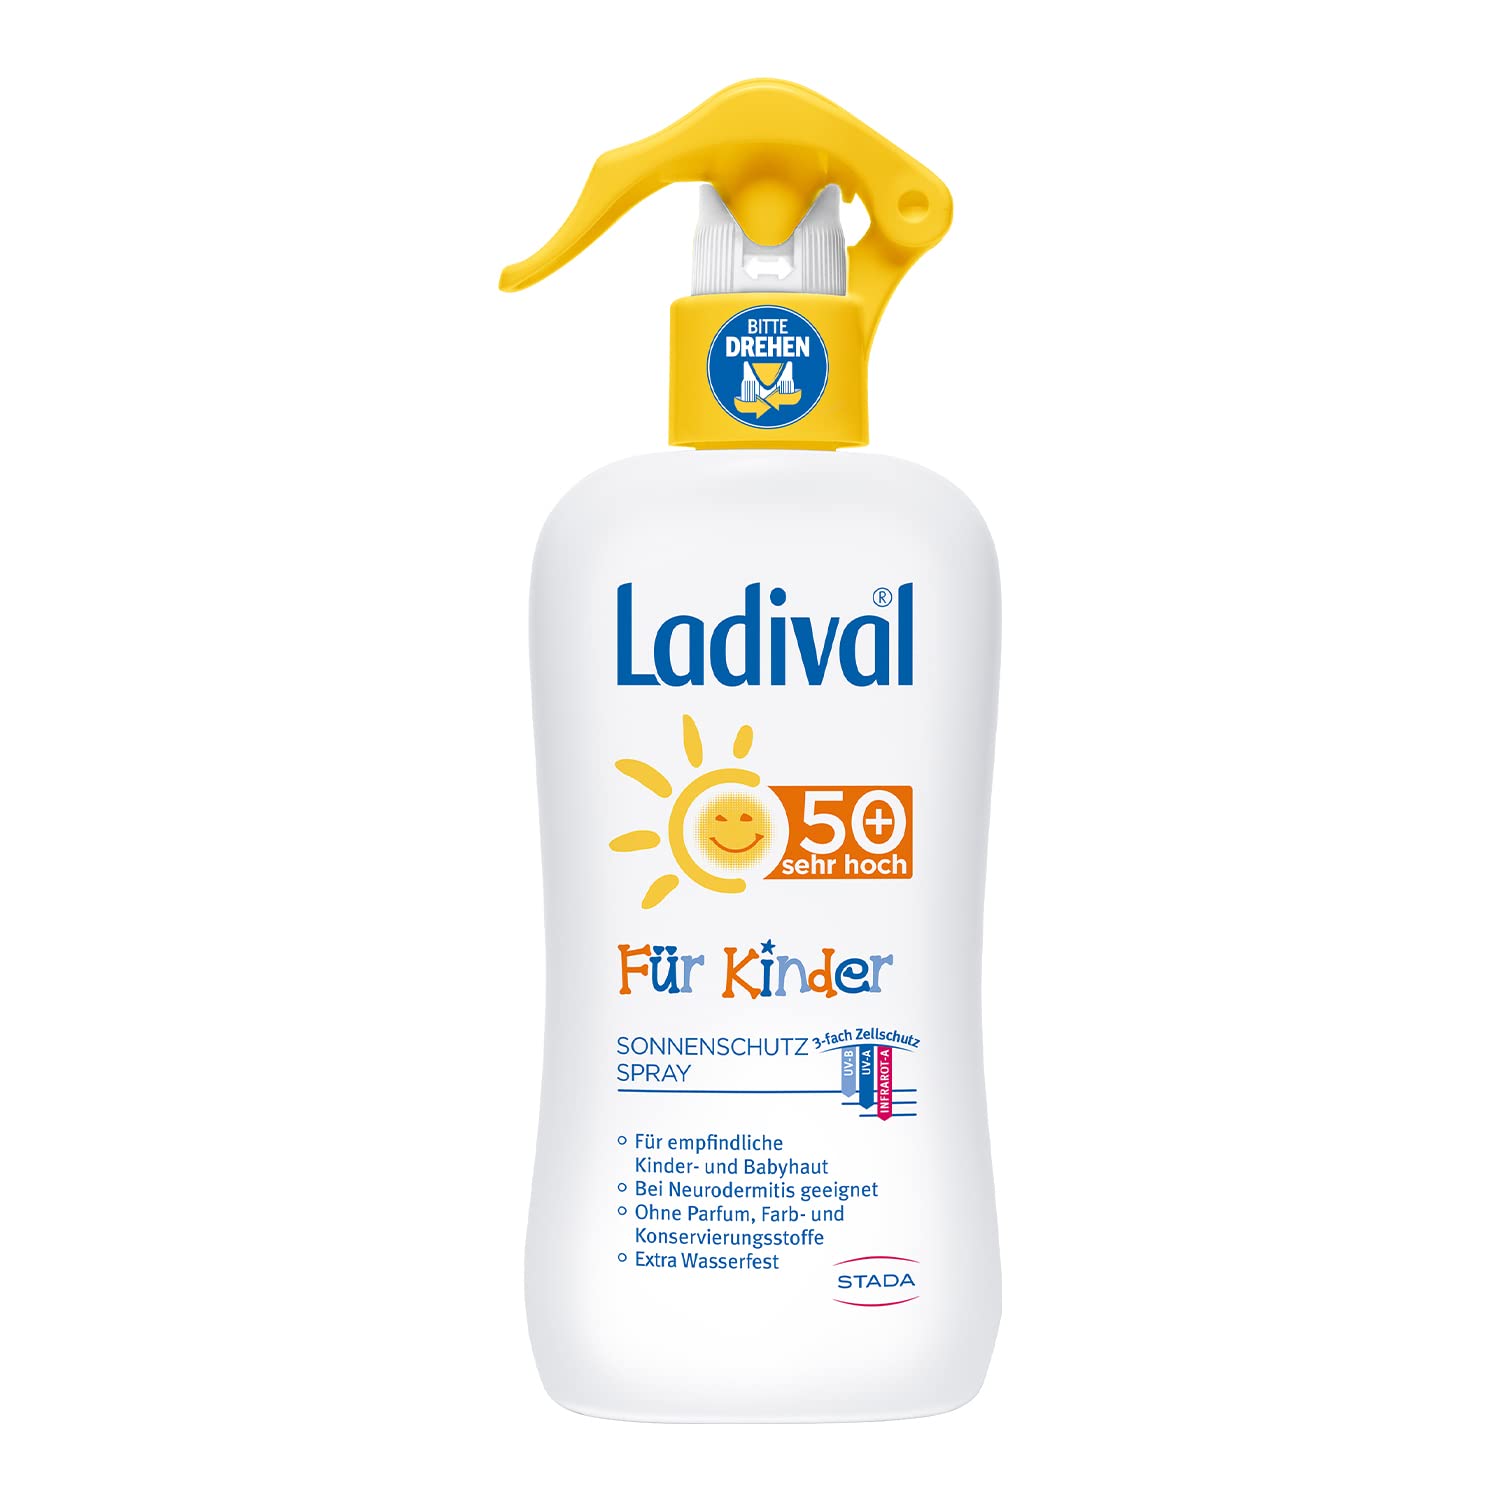 LADIVAL Children\'s Sun Protection Spray SPF 50+ - Perfume-free Sun Spray for Children - No Colourants and Preservatives - Waterproof, 200 ml